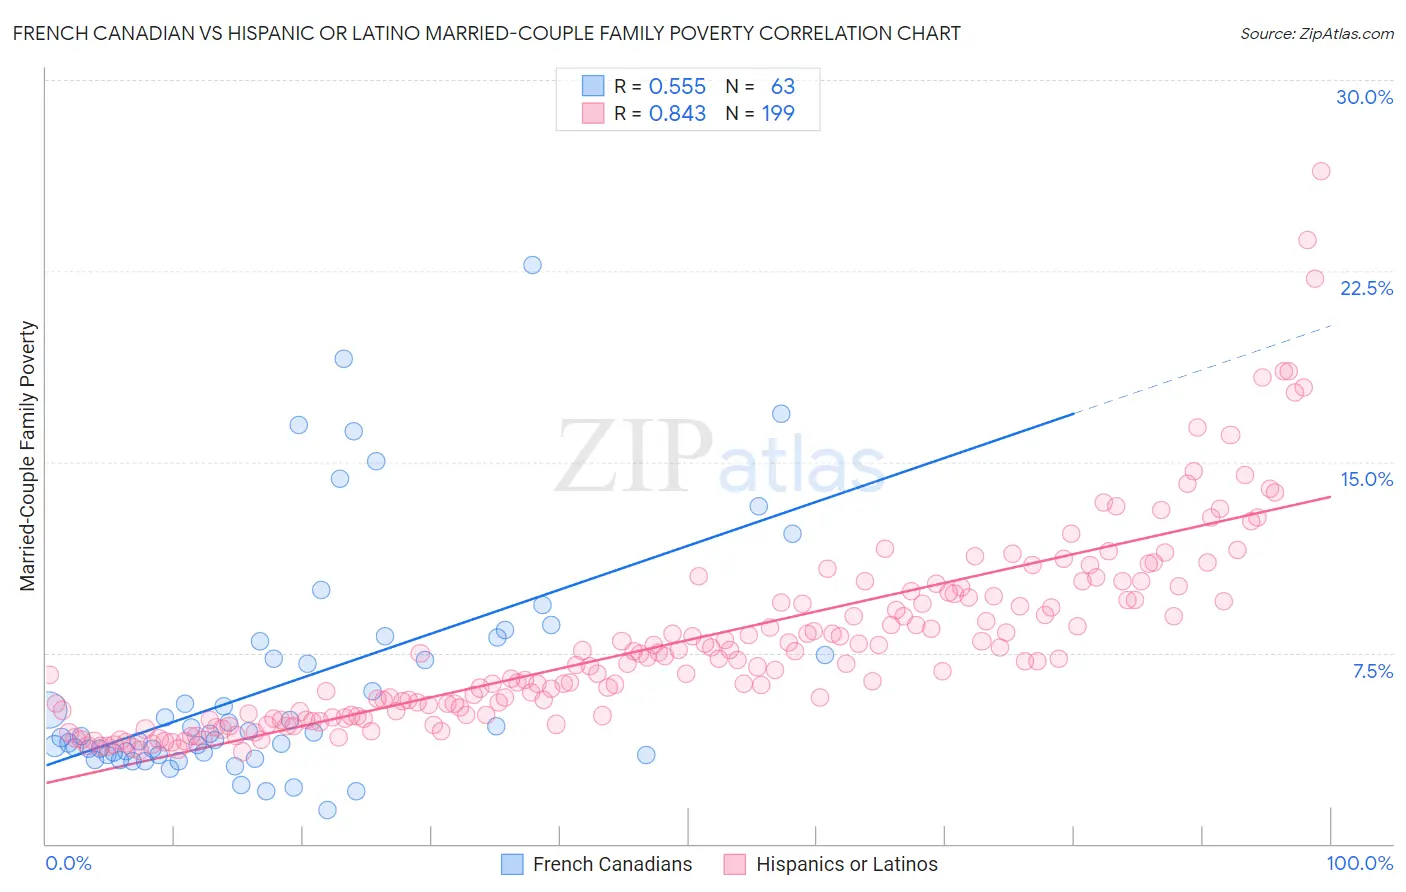 French Canadian vs Hispanic or Latino Married-Couple Family Poverty